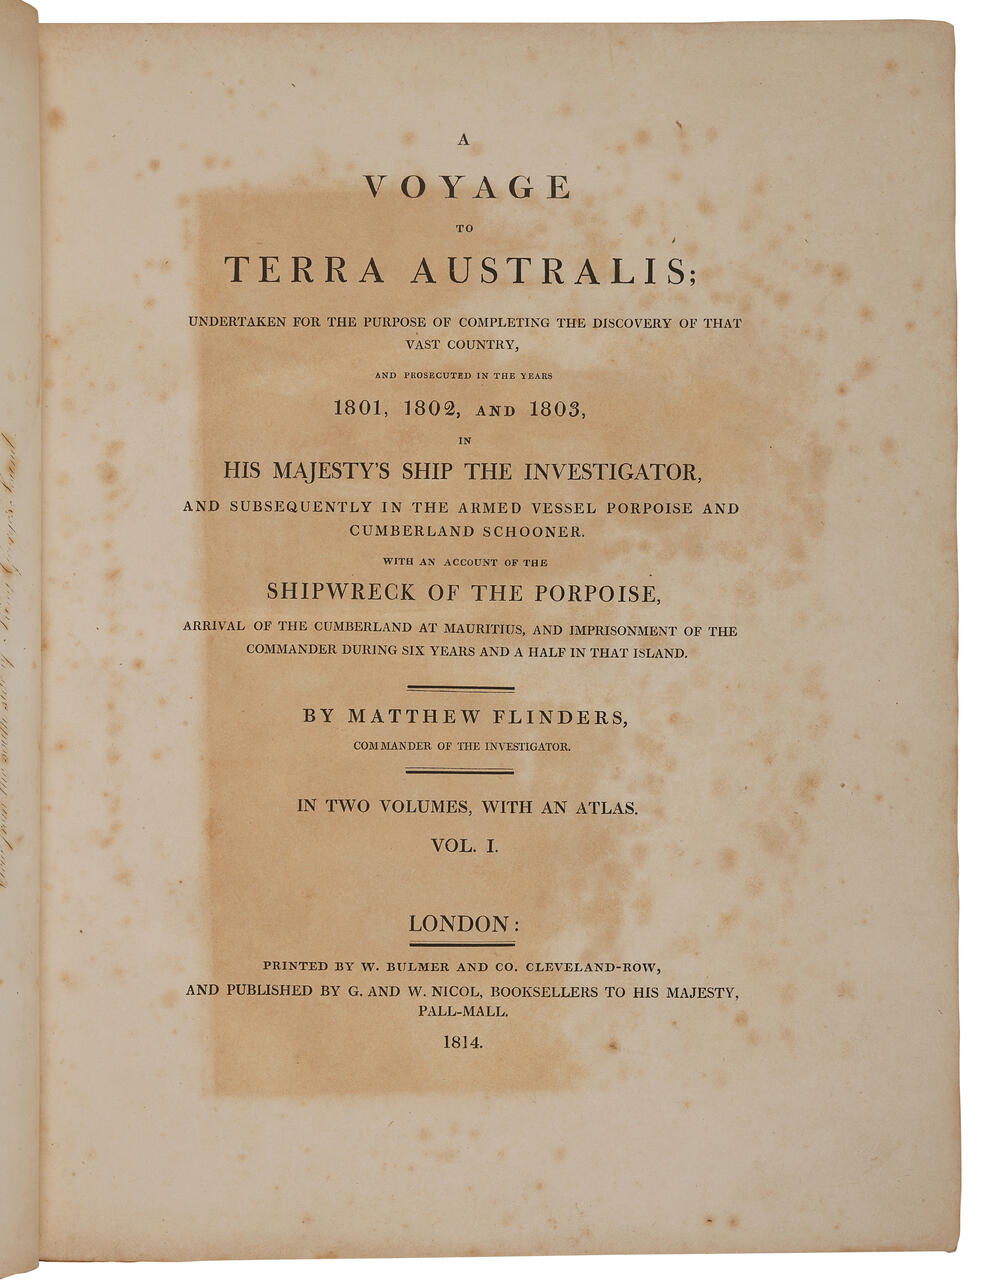 Yellowed book page with the words "A Voyage to Terra Australis"